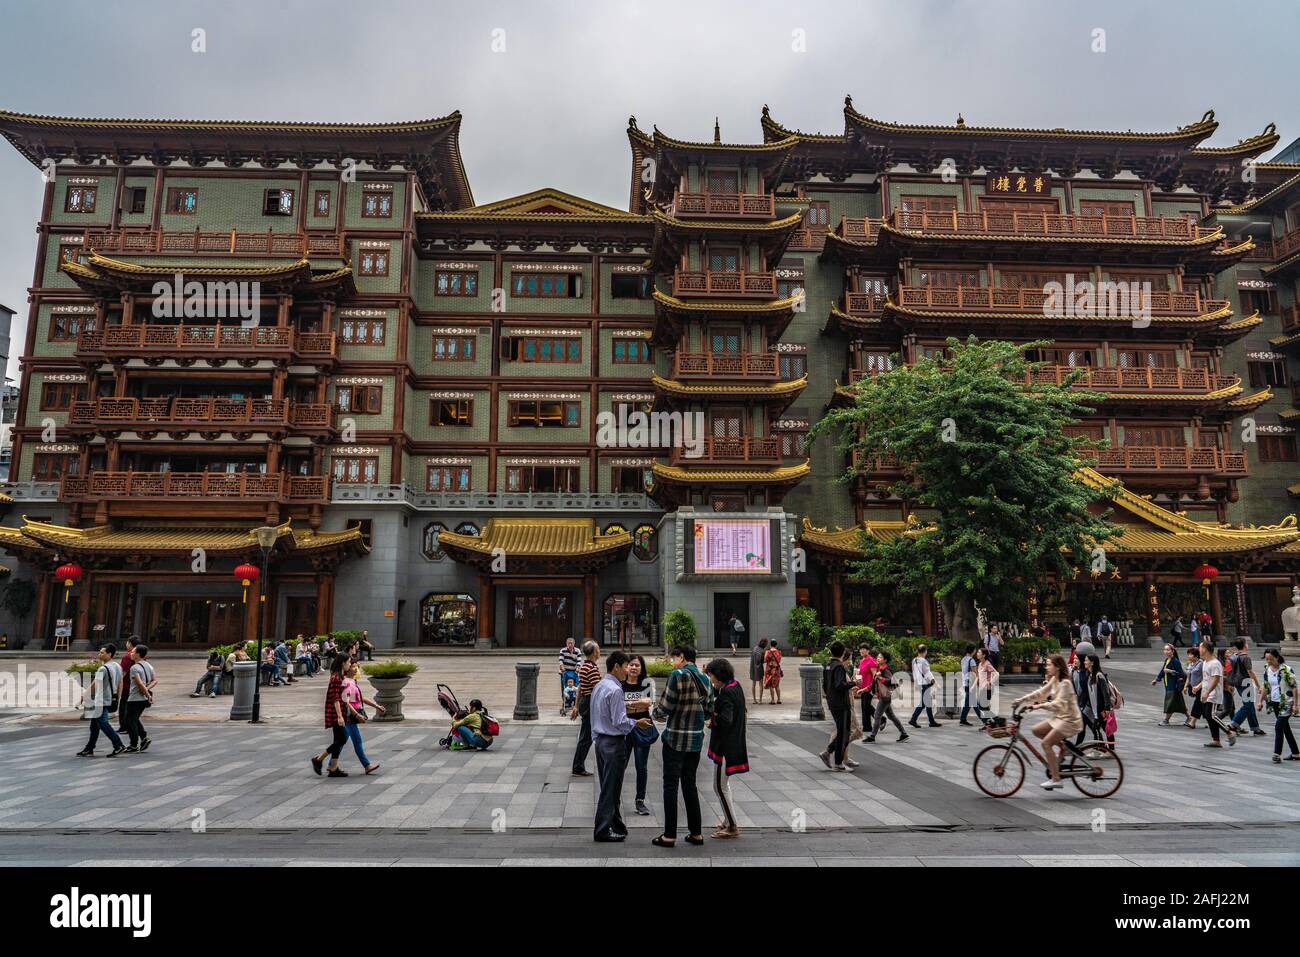 GUANGZHOU, CHINA - OCTOBER 24: This is the Dafo Temple, a Chinese buddhist temple and traditional landmark building on October 24, 2018 in Guangzhou Stock Photo